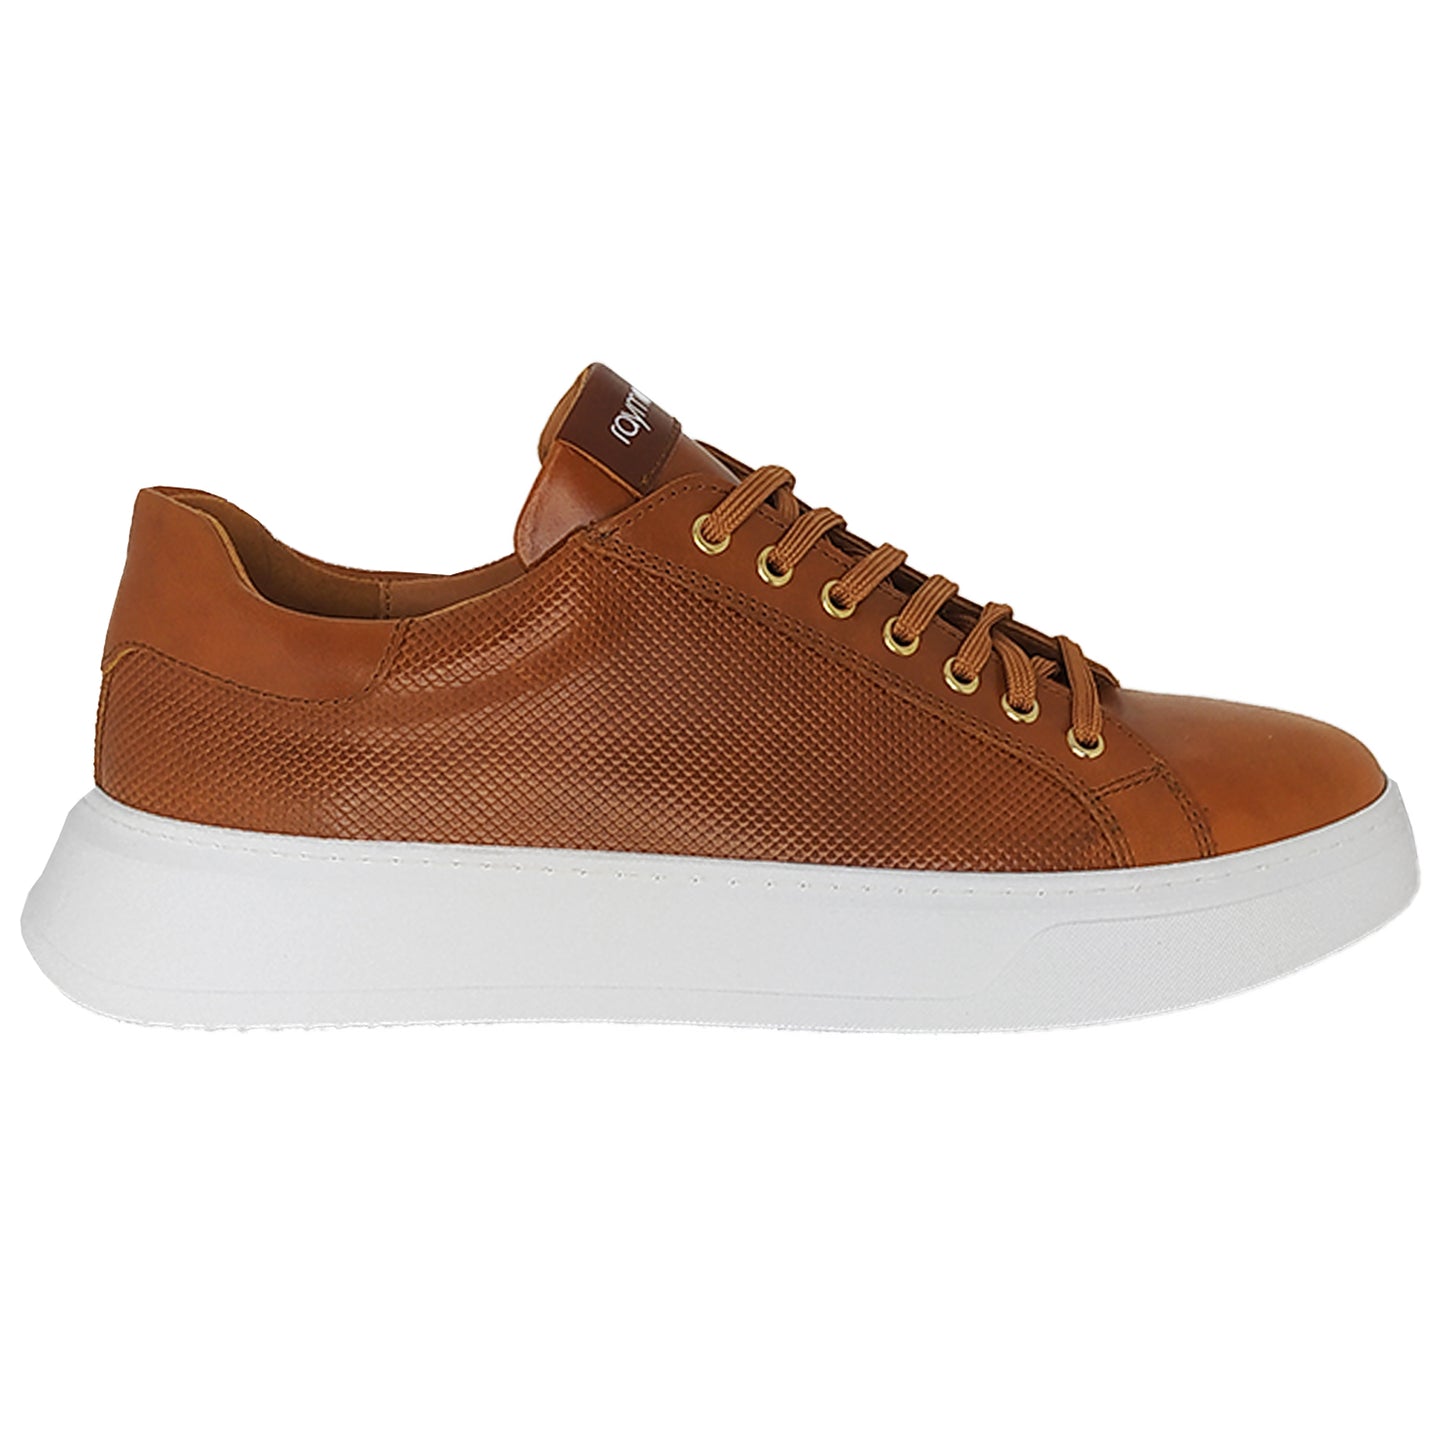 Handmade Leather Sneakers Shoes TABAC 784 TABAC